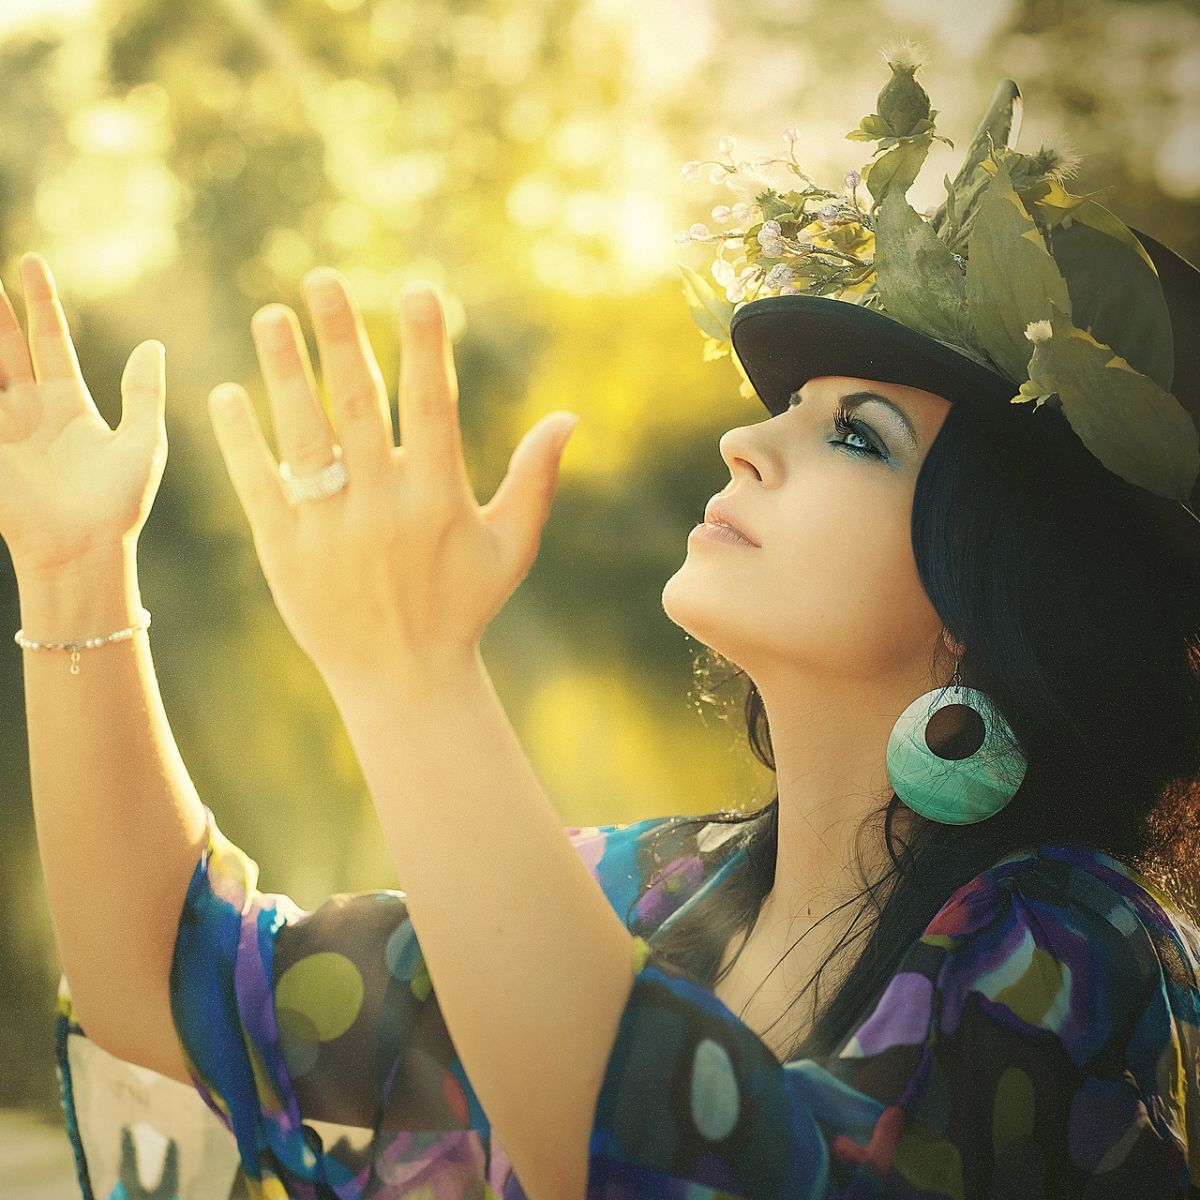 Beauty, woman, holding hands up, flowered hat